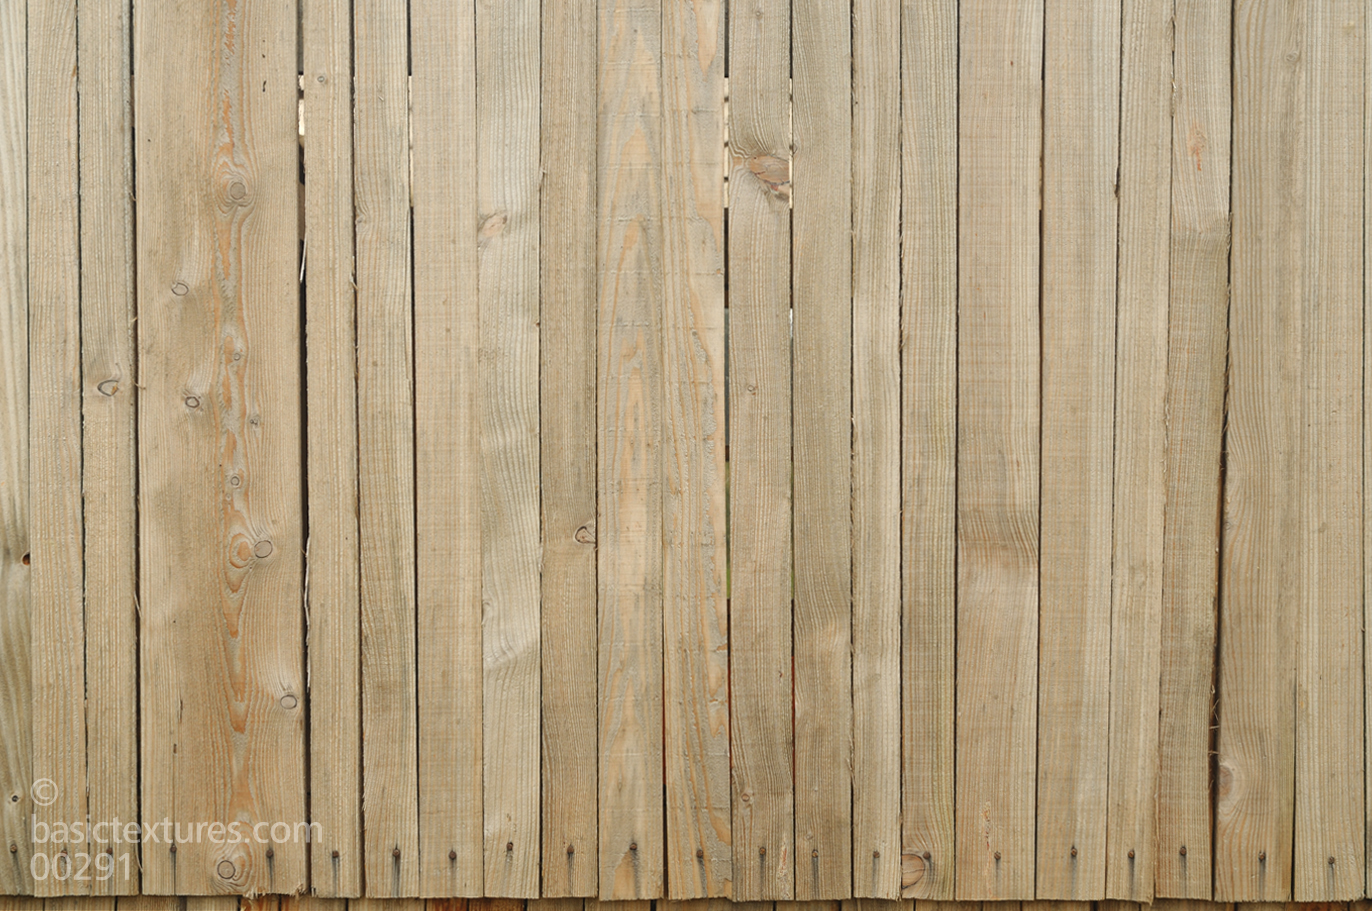 Wood Planks Wall Raw Image For Textures Background